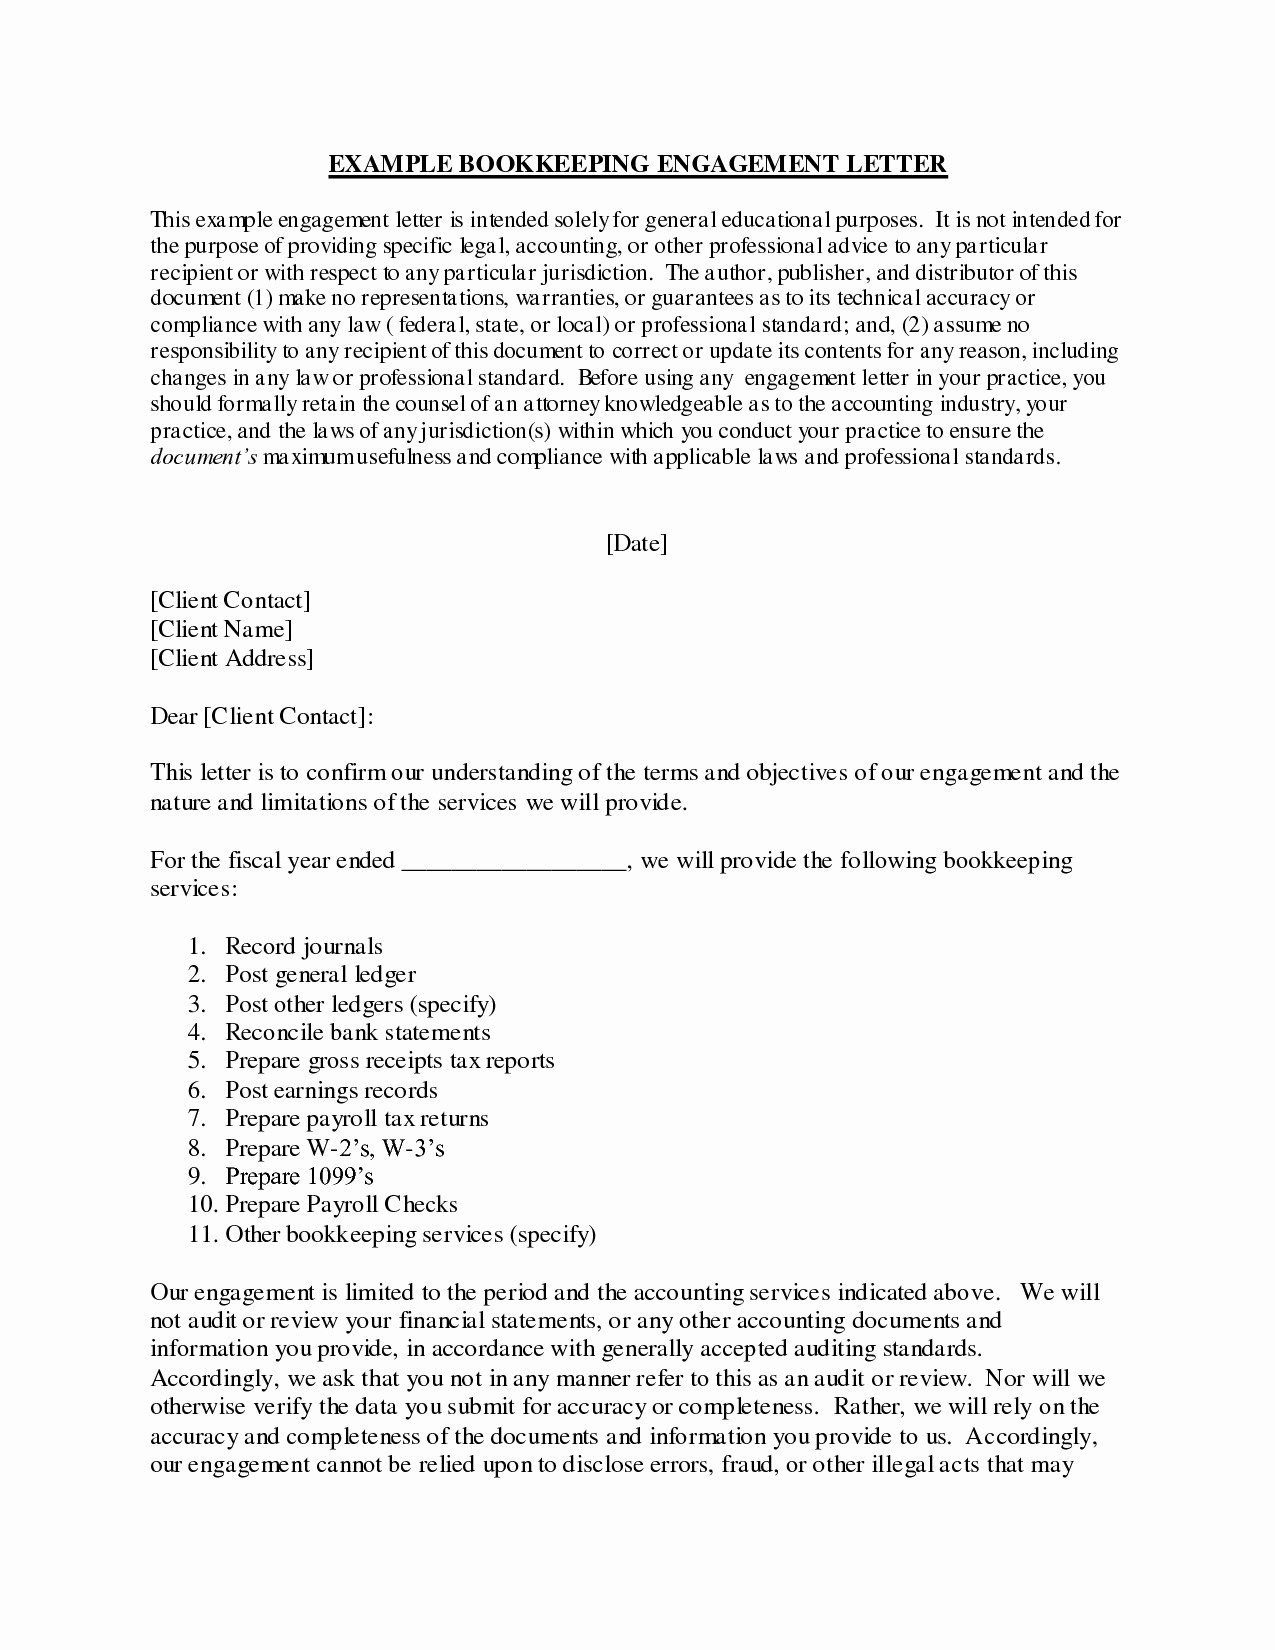 bookkeeping engagement letter template example-Audit Engagement Letter Sample New 18 Sample Consulting Engagement Letters 4-h